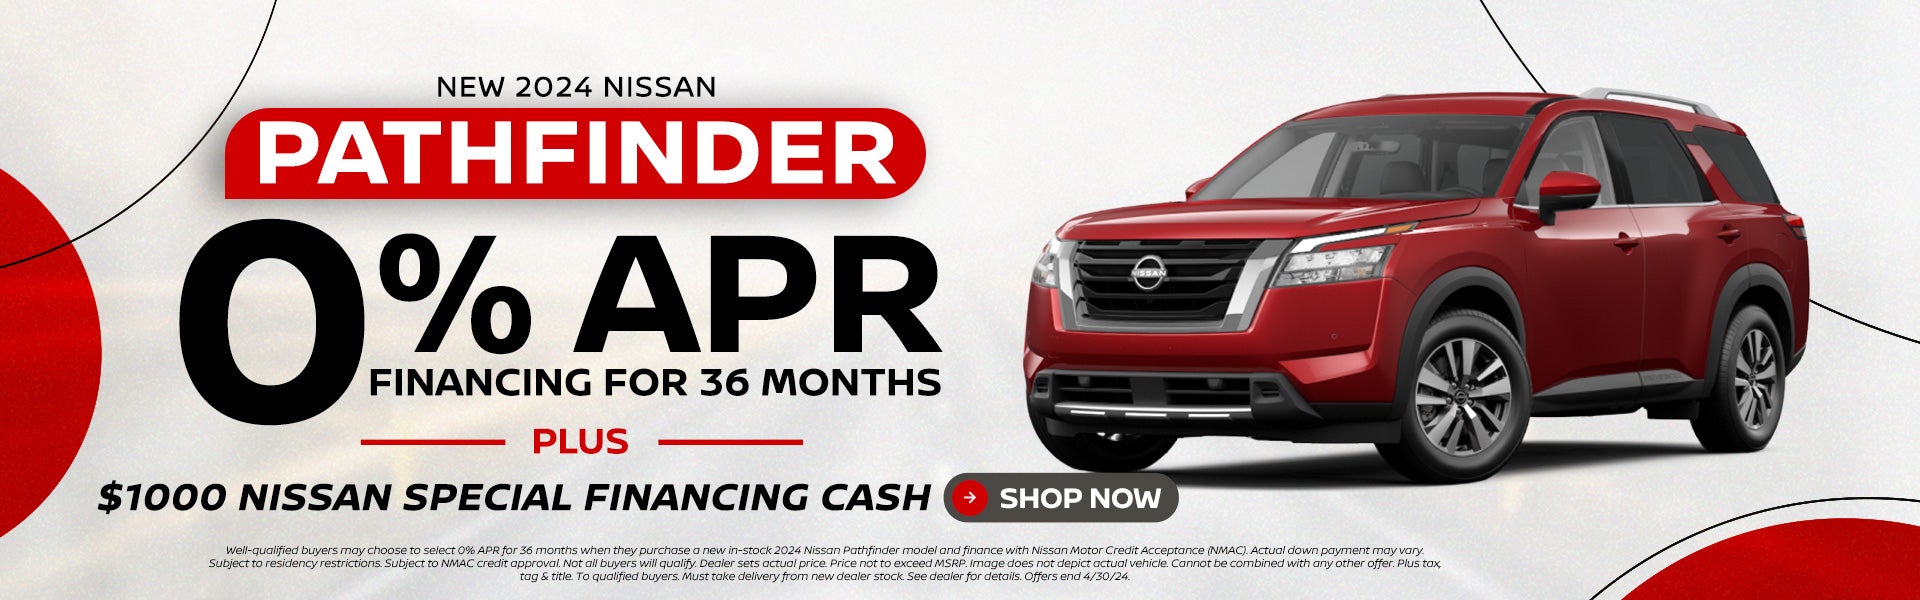 2024 Nissan Pathfinder 0% for 36 Months with $1000 Cash